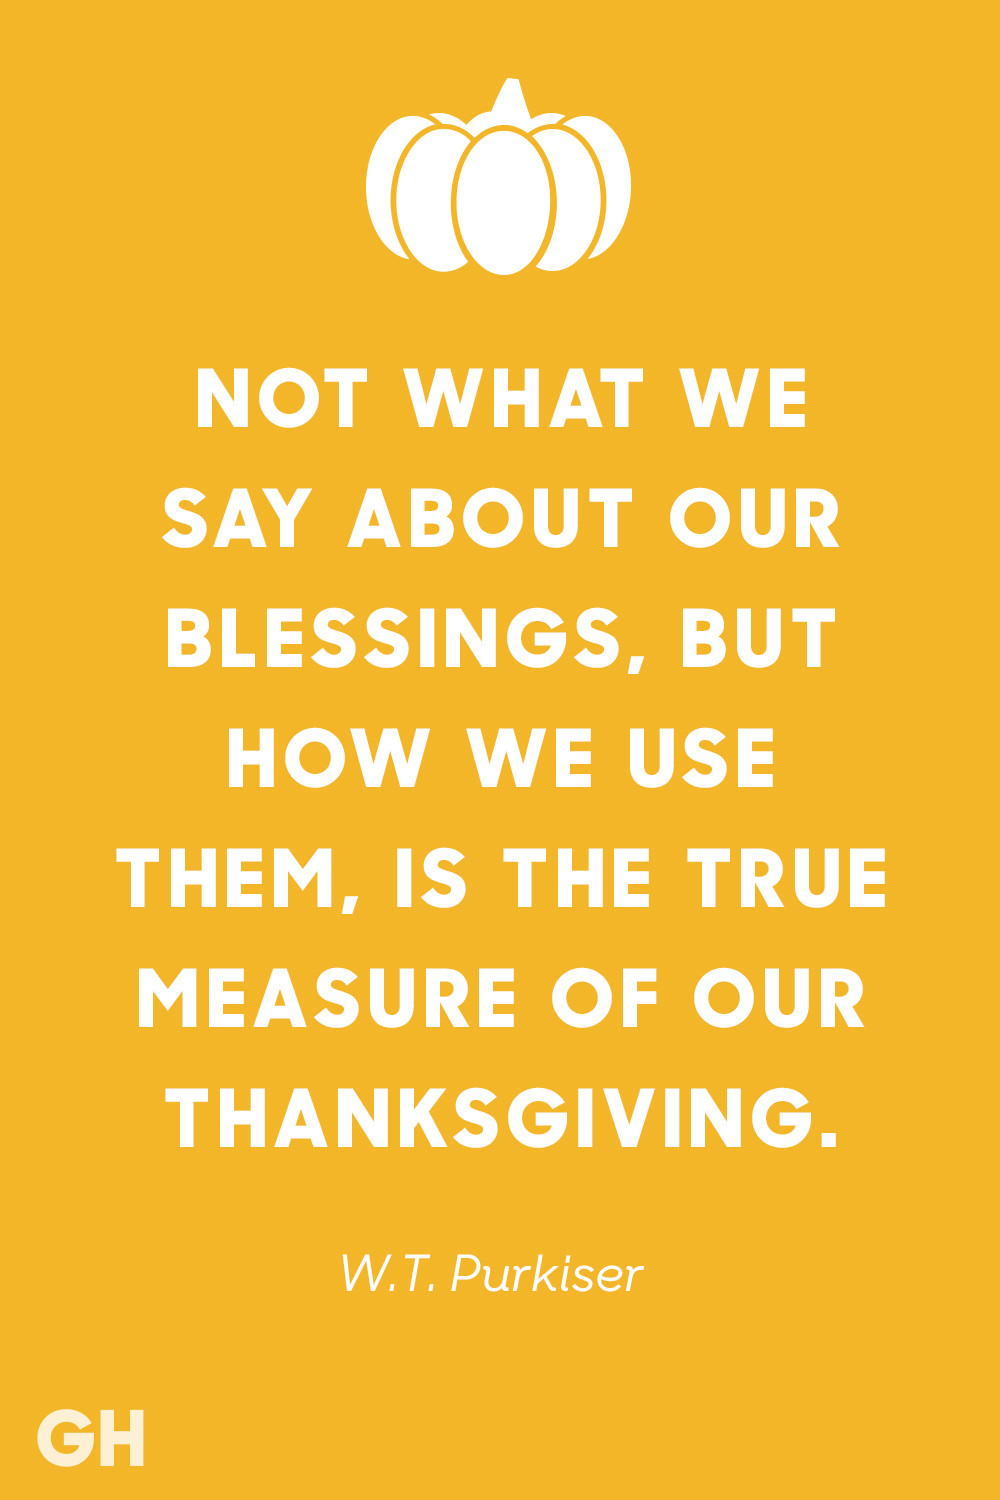 Inspirational Quote Thanksgiving
 15 Best Thanksgiving Quotes Inspirational and Funny